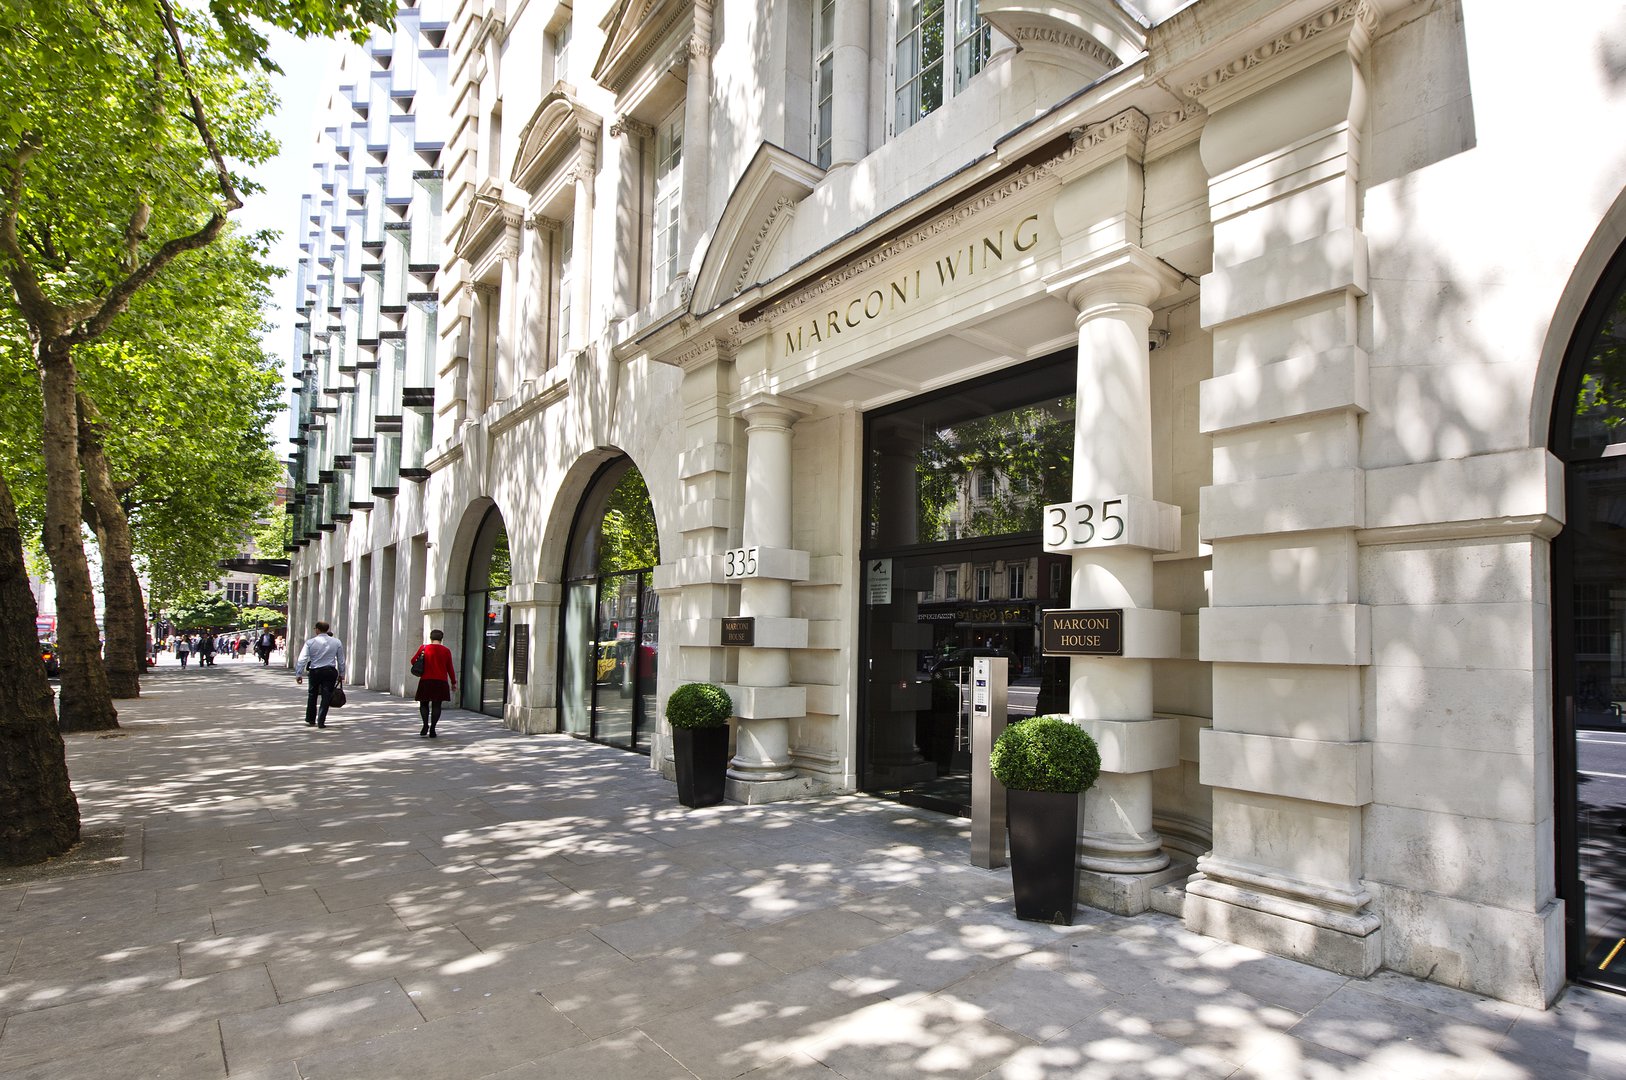 Looking to Make a Move? Consider Renting or Selling Your Apartment at Marconi House in London with Fraser Bond